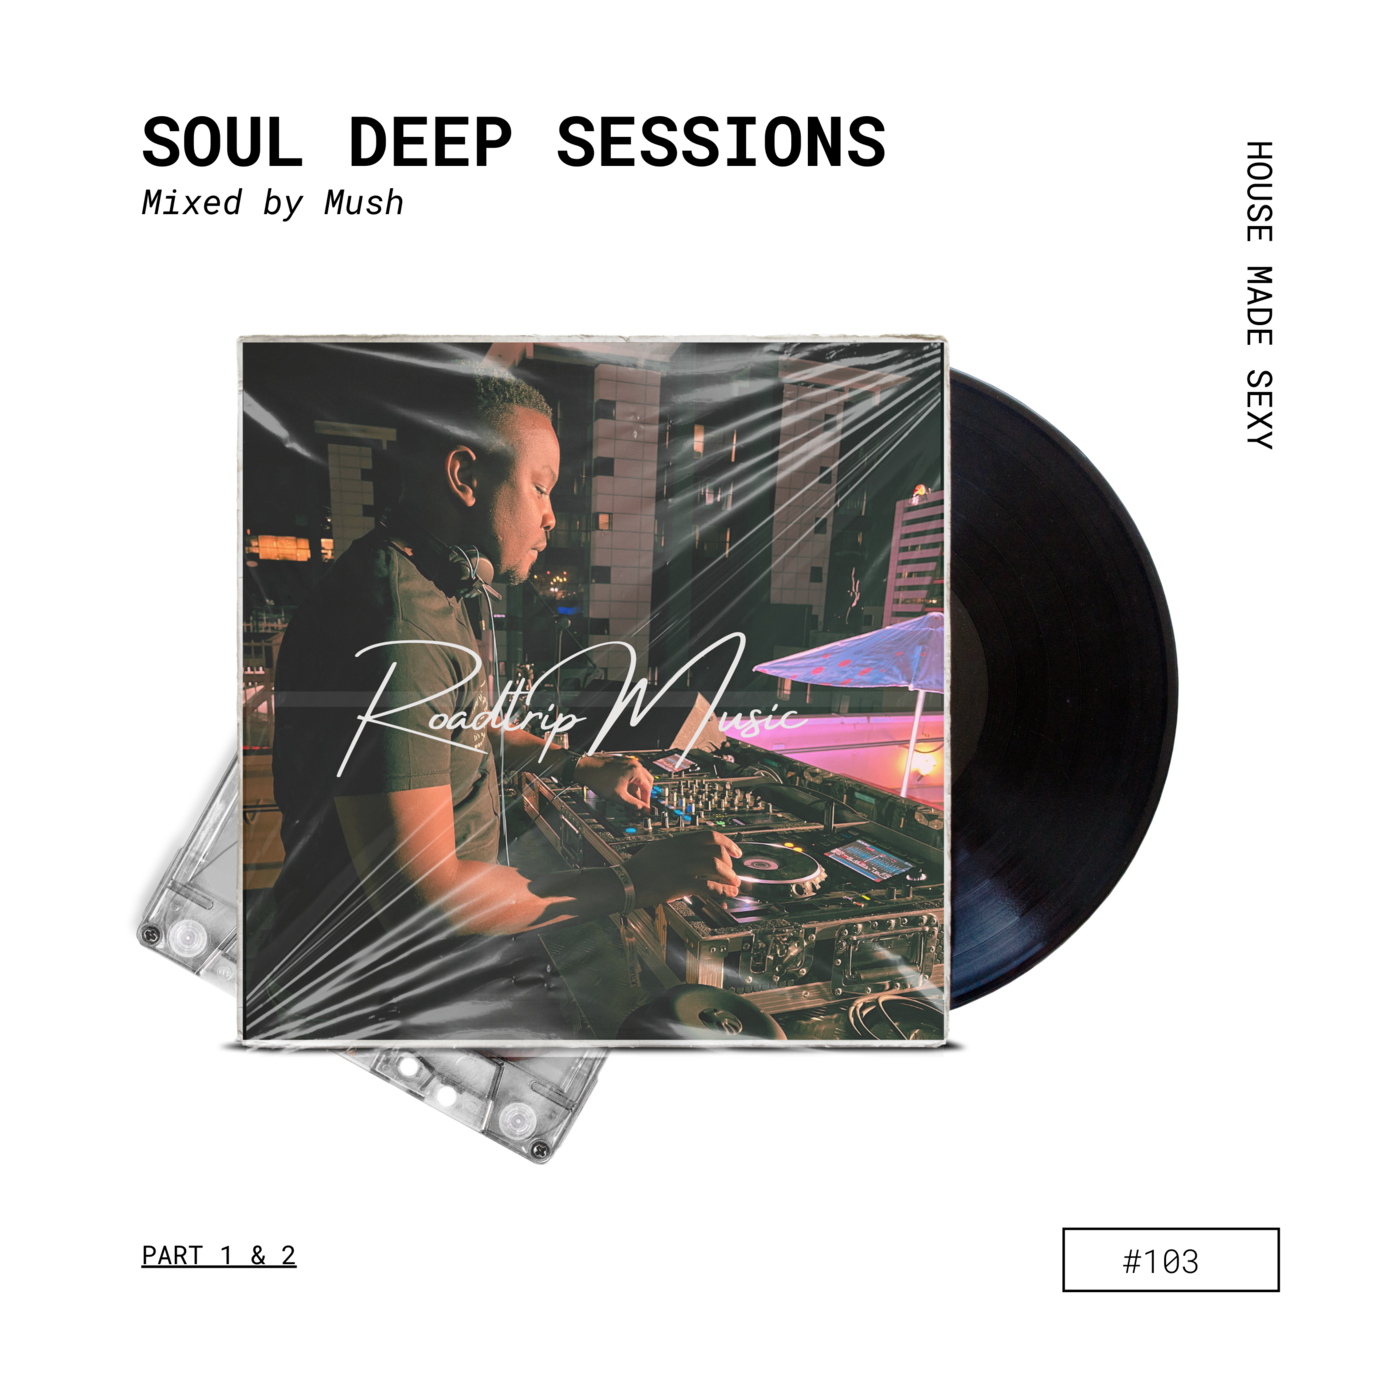 Soul Deep Sessions 103 pt2 mixed by Mush